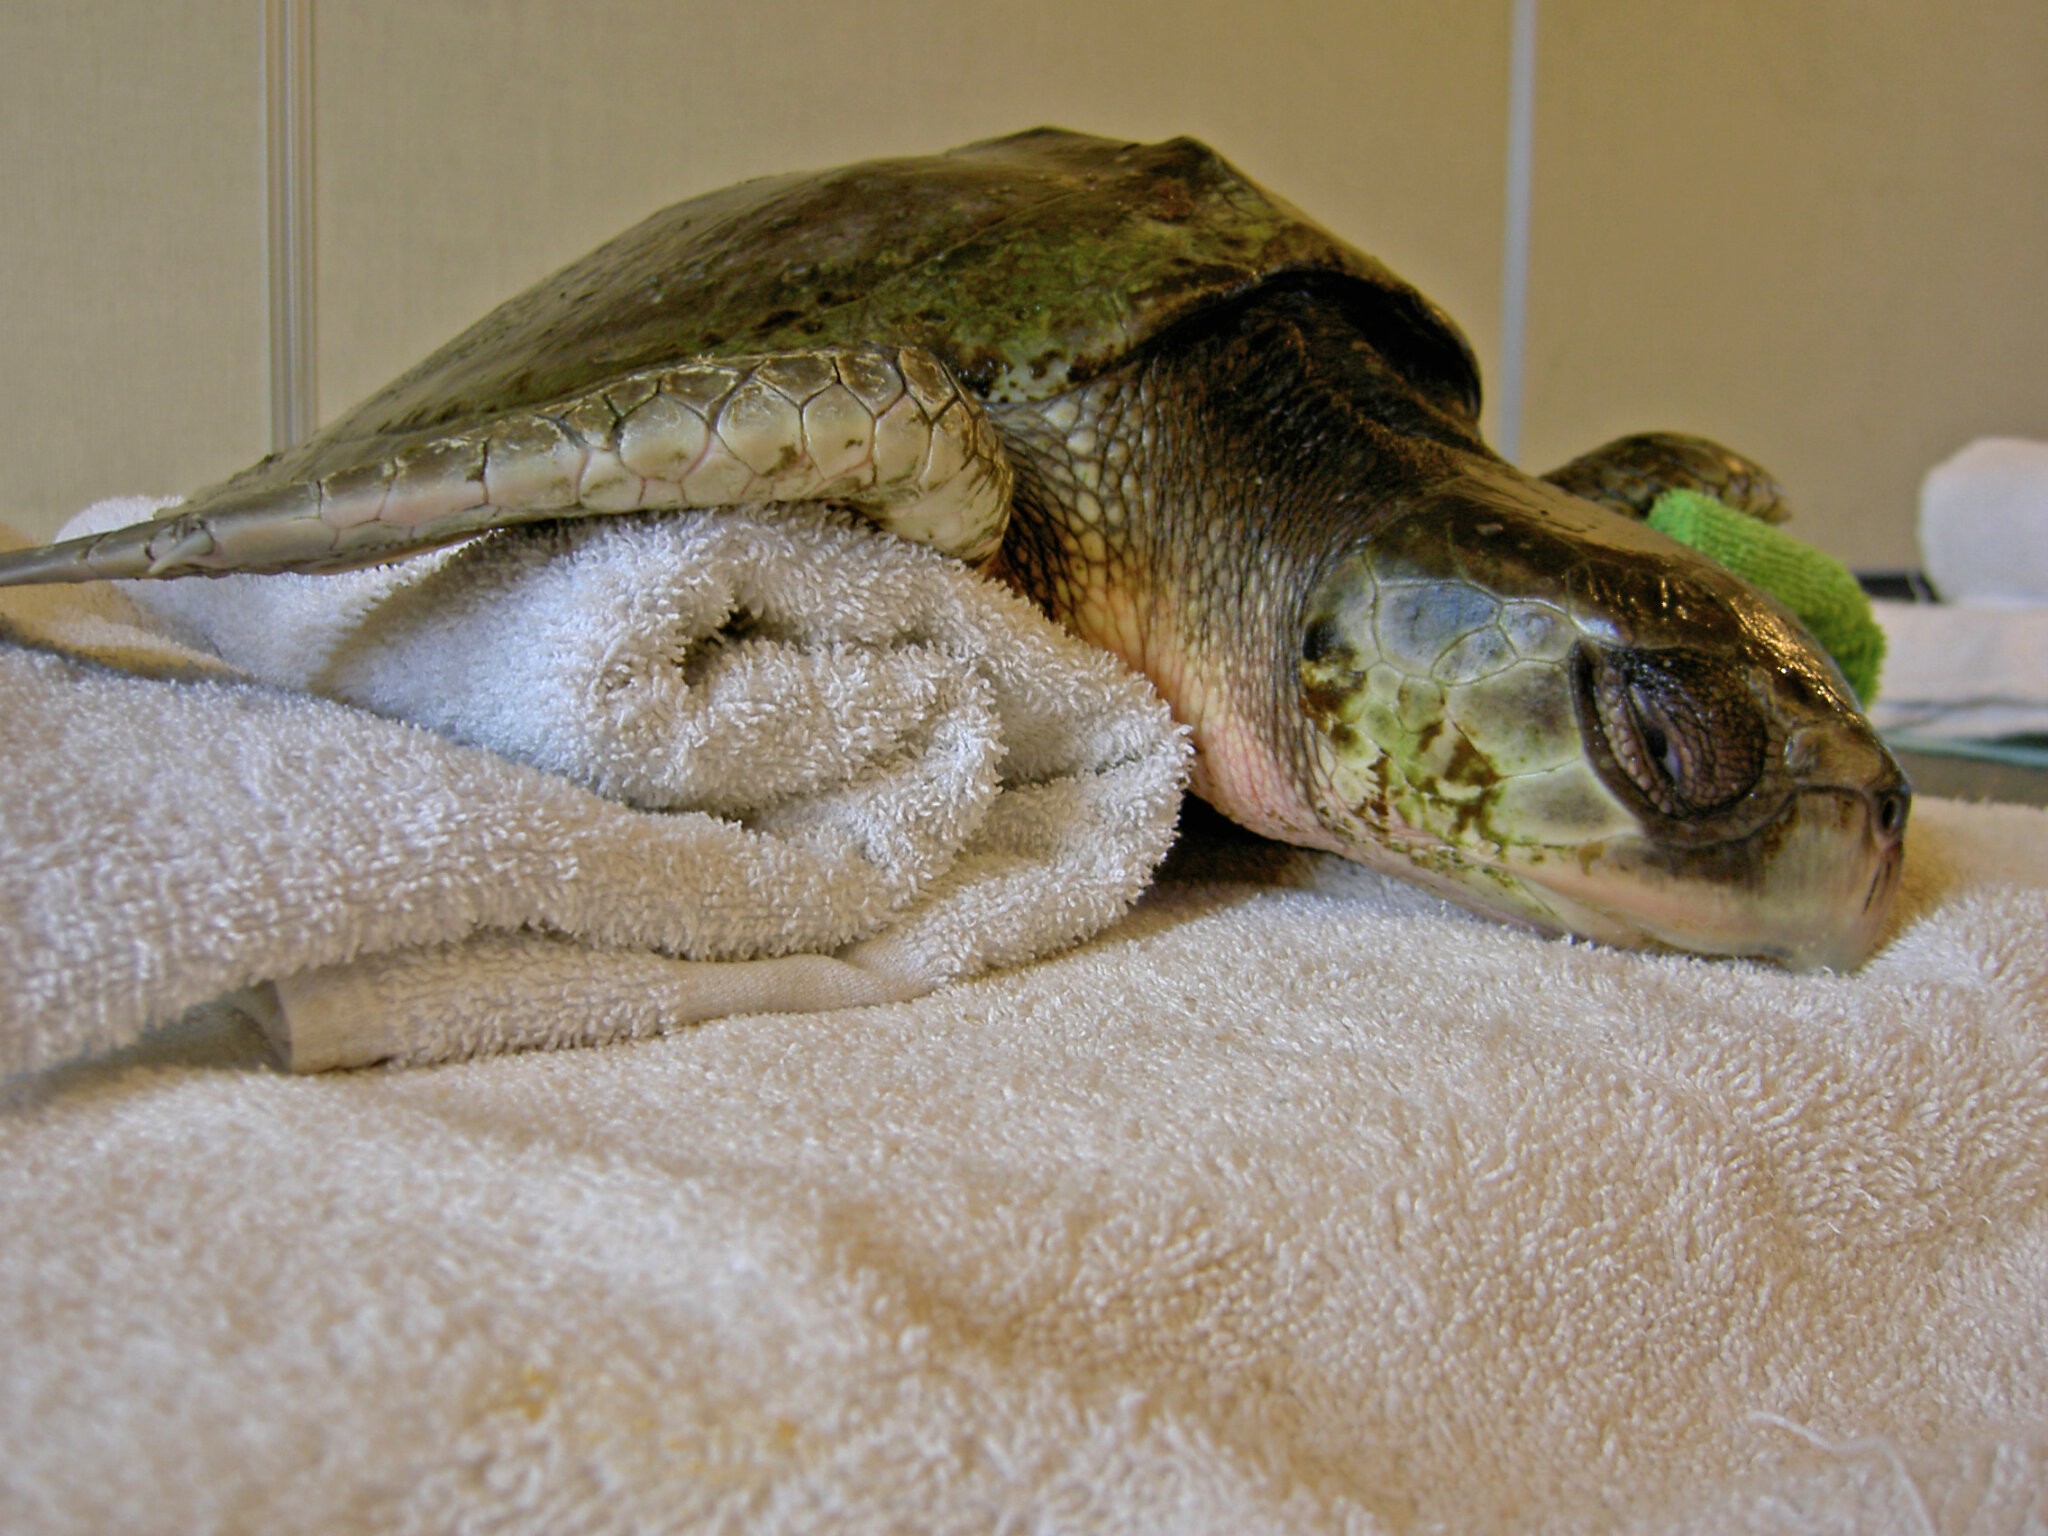 A cold-stunned Kemp's ridley sea turtle resting on towels after being rescued from the cold waters of Cape Cod, Massachusetts